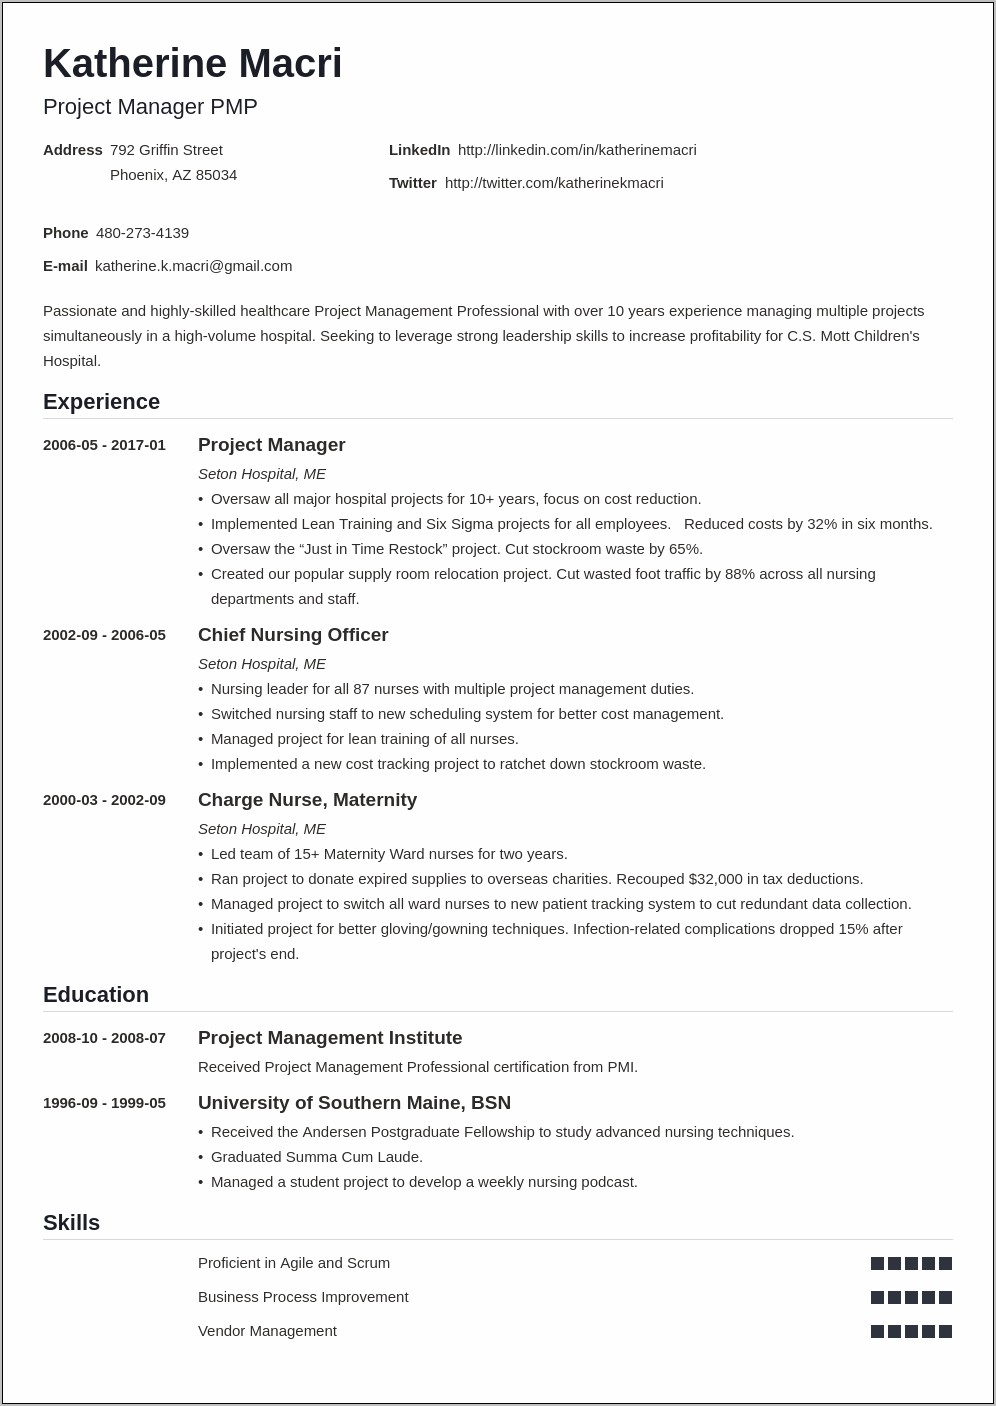 Resume Keywords For Project Manager